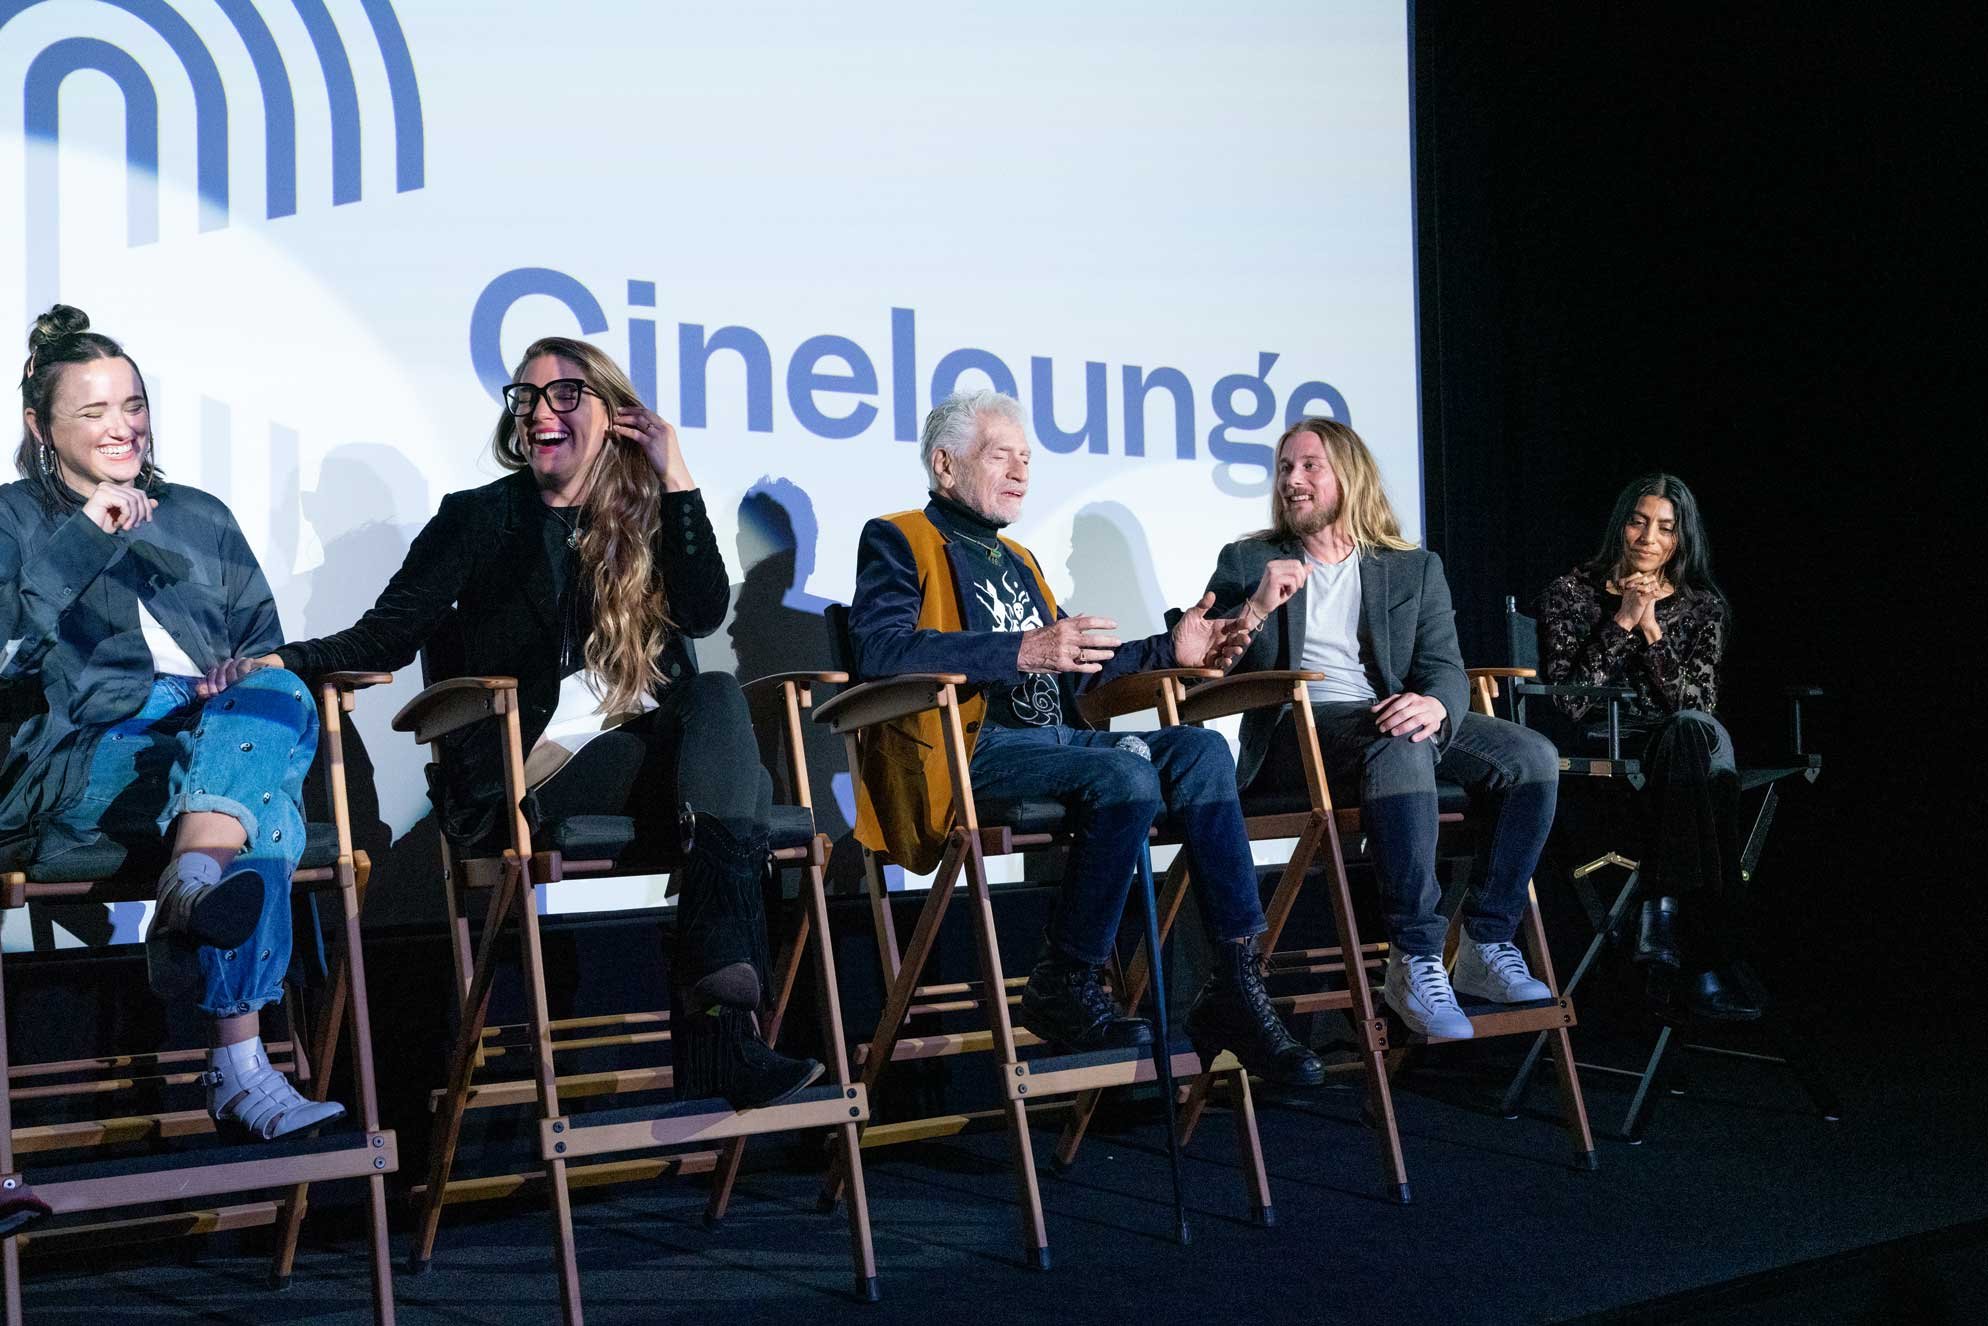  The cast and crew of "Moon Manor" at a post-screening Q&amp;A. From left to right: Writer/Directors Machete Bang Bang &amp; Erin Granat, actors Jimmy Carrozo, Lou Taylor Pucci, Reshma Gajjar. February 26th, 2022 - Cinelounge Cinemas Hollywood, Los A